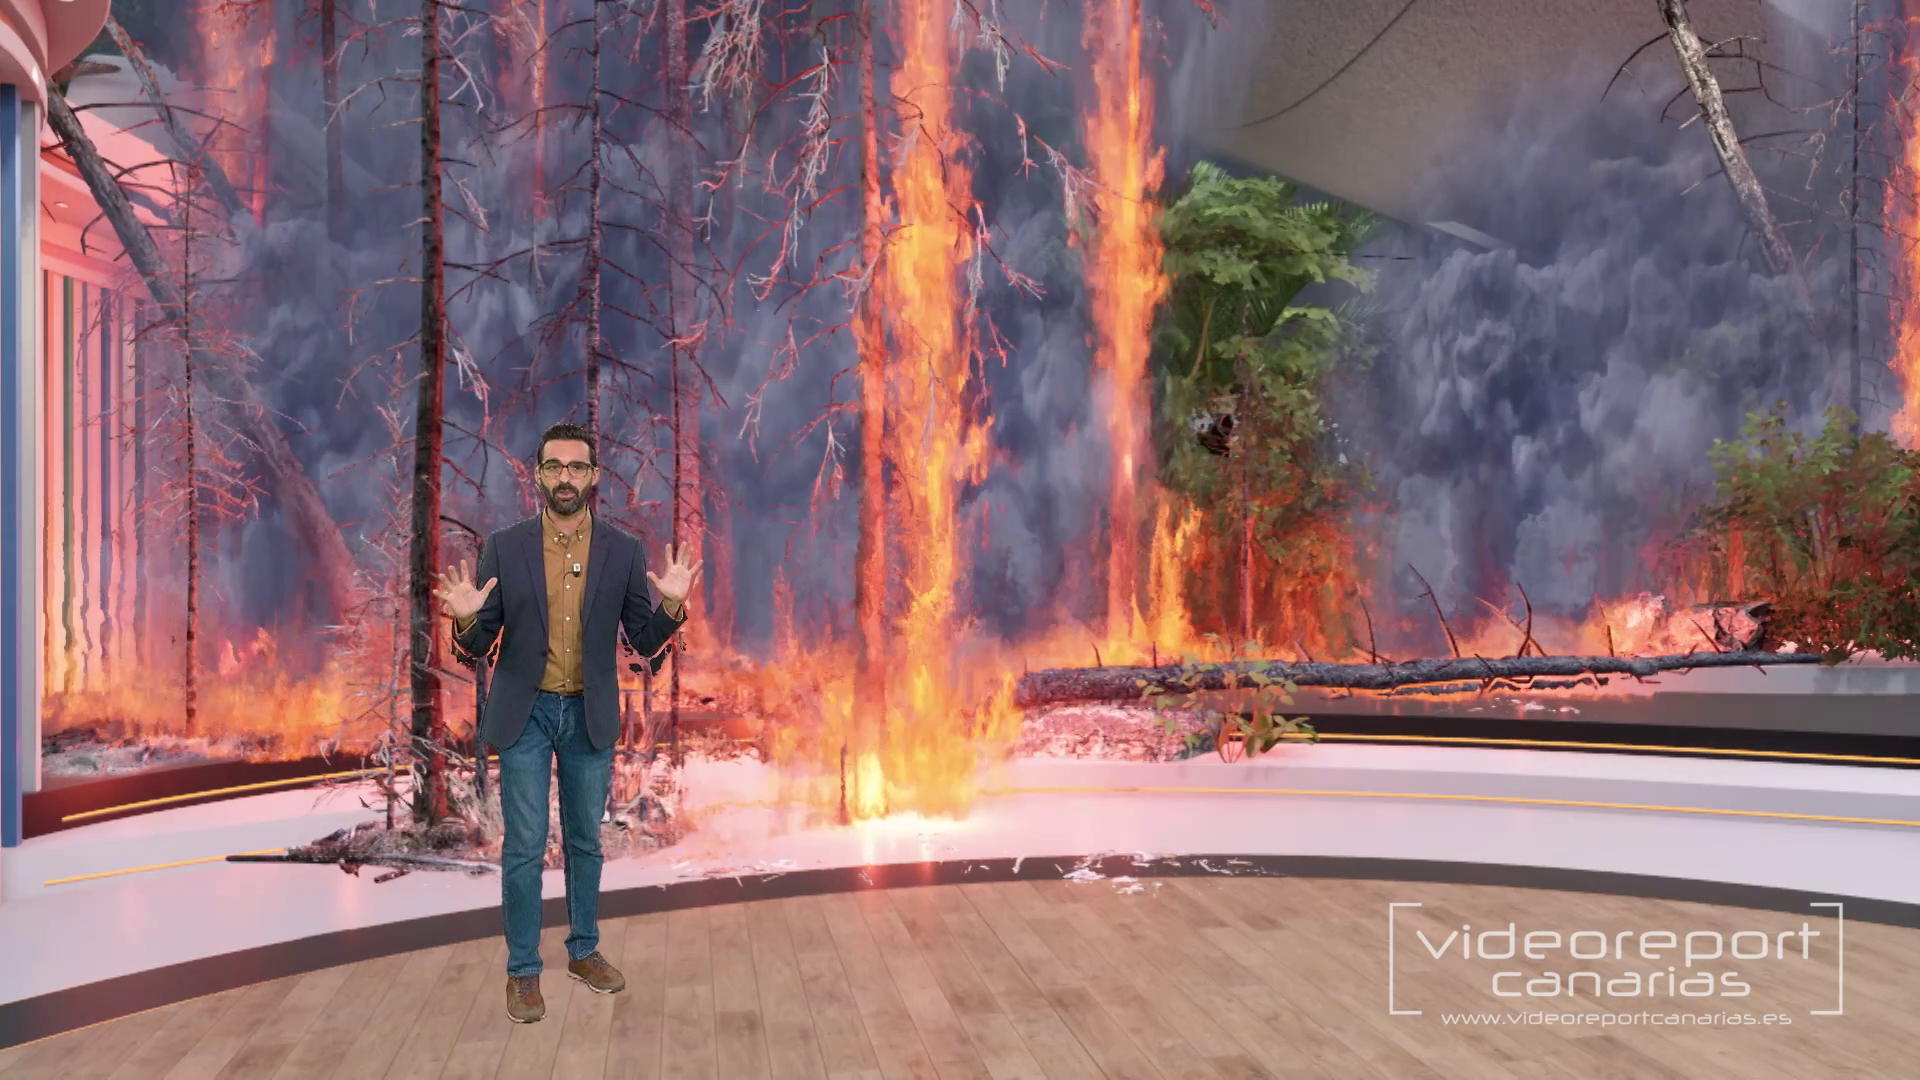 TV host standing in the virtual studio and forest fire behind him